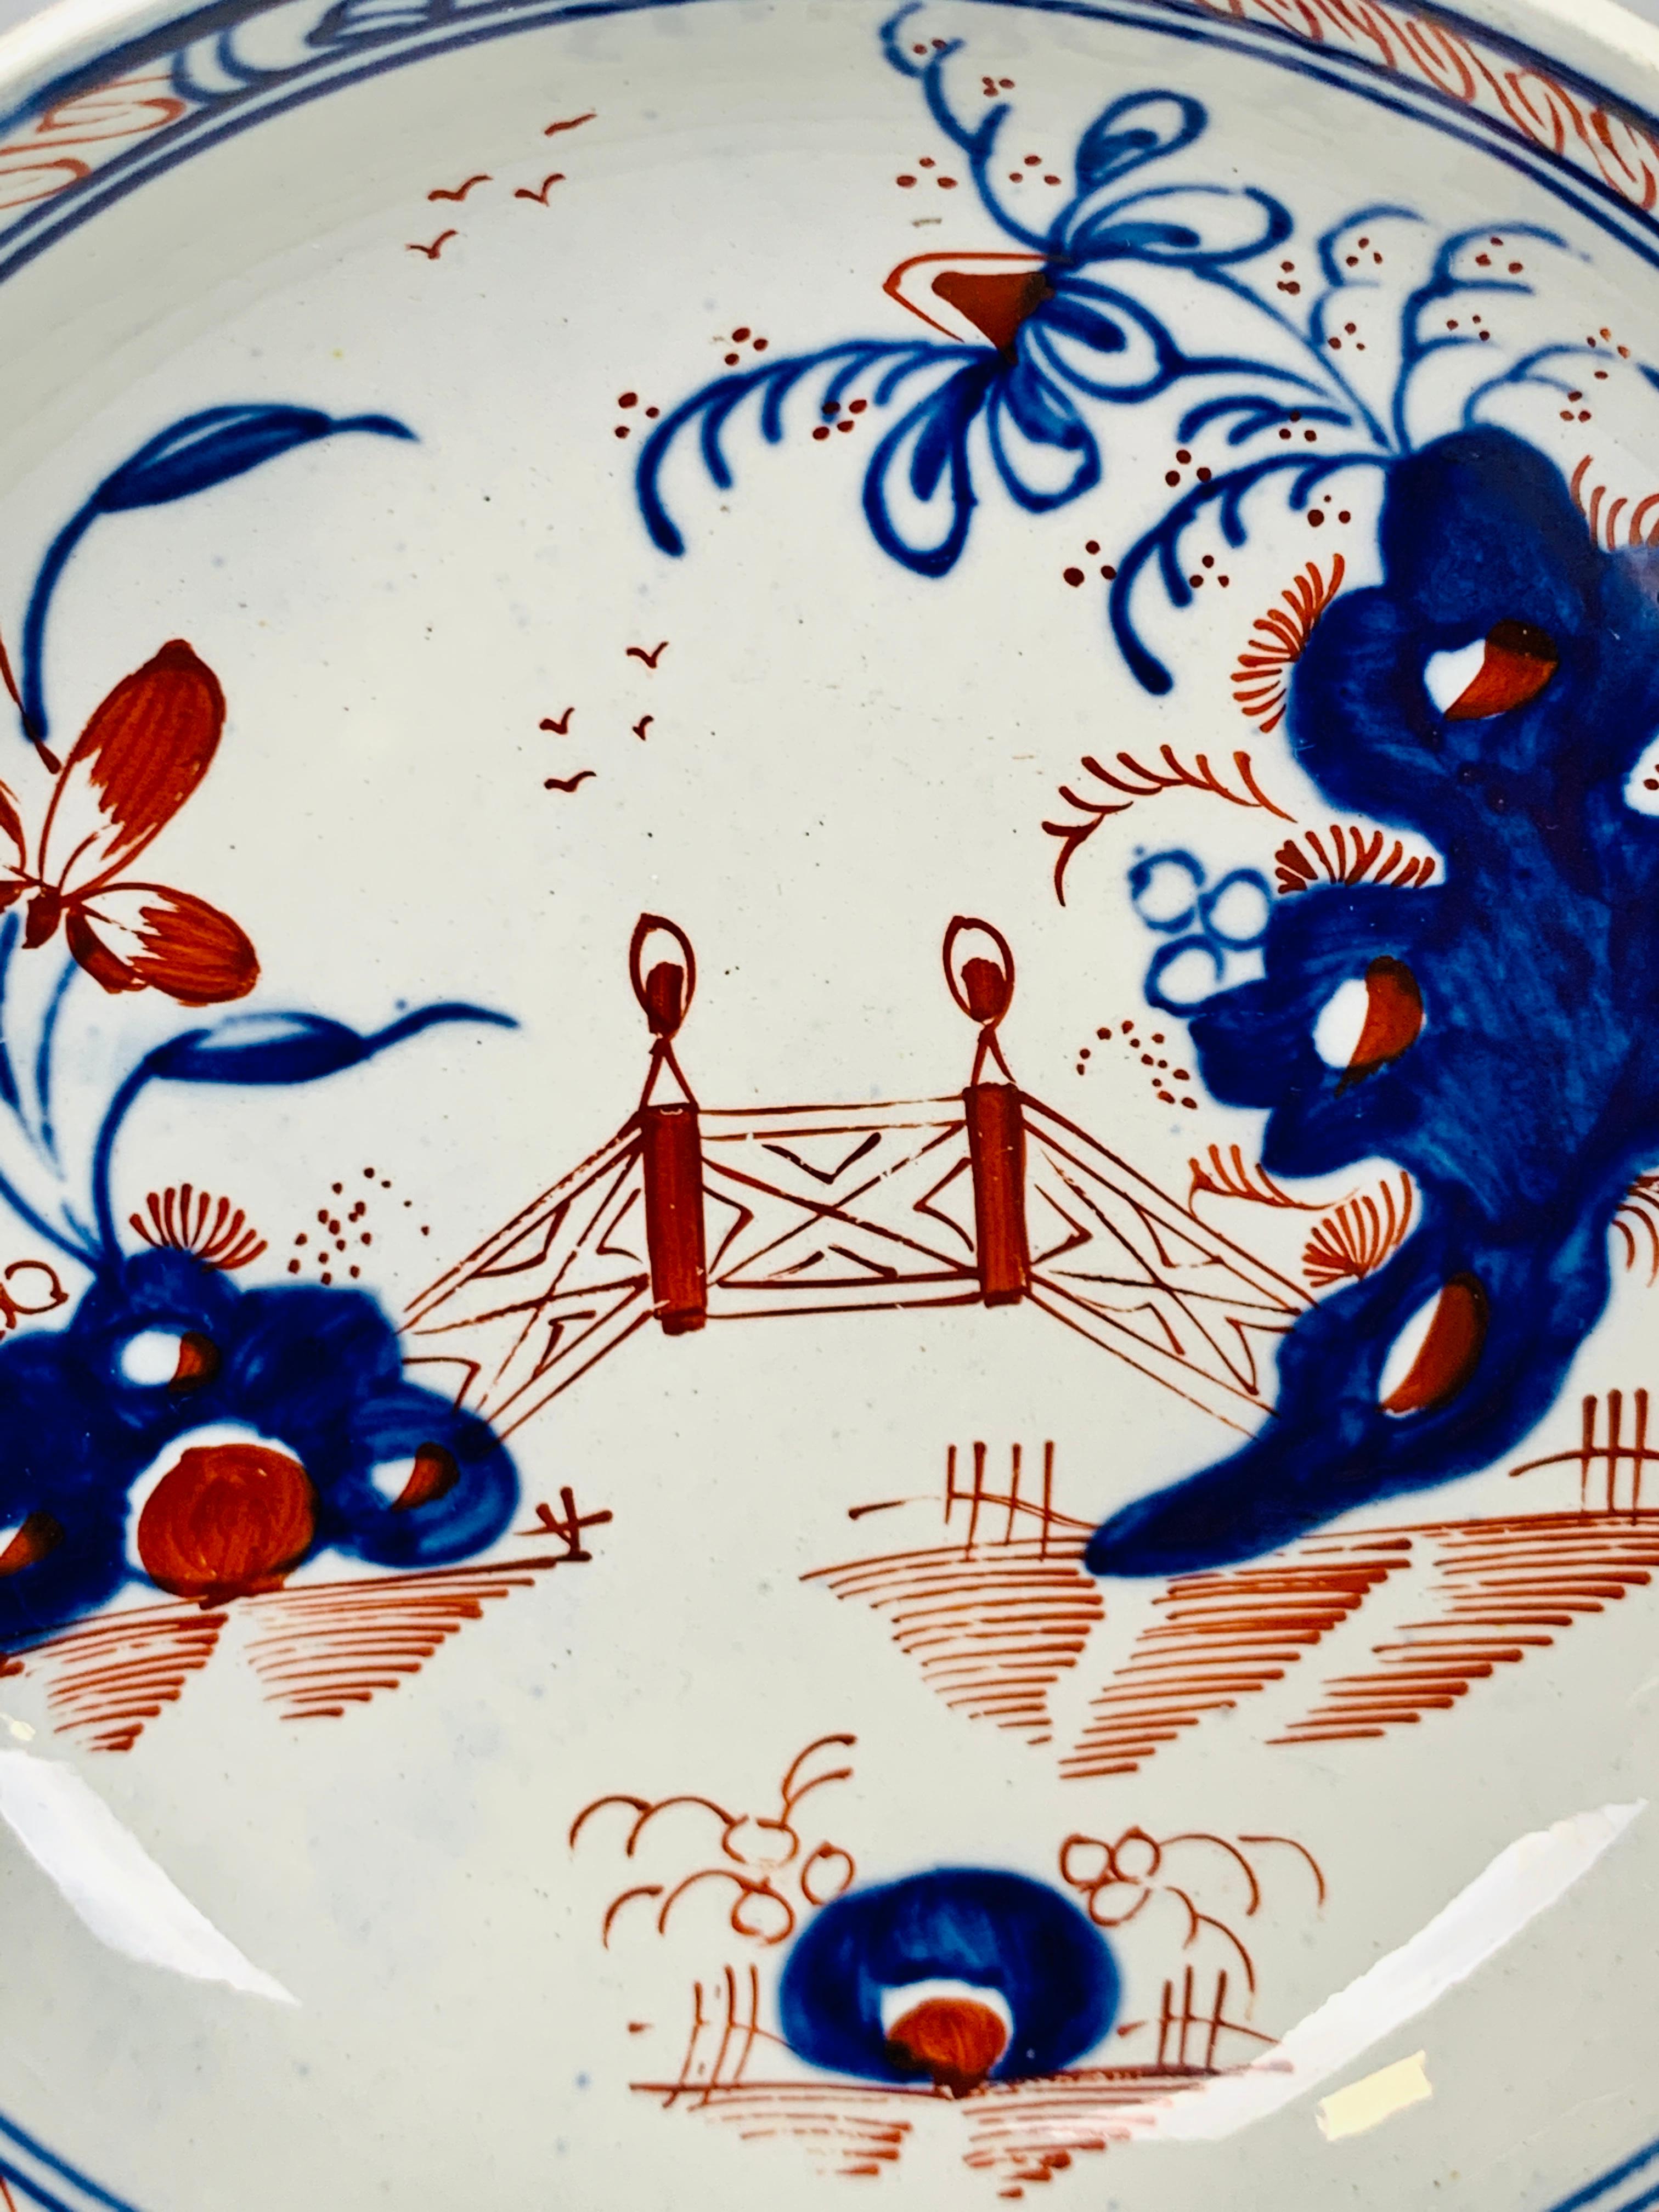 This is a lovely pair of hand-painted 18th century pearled creamware tea bowls and saucers. Made in England circa 1785, the cups and saucers are painted in a chinoiserie pattern with Imari colors. We see a garden with an oversized flower and two